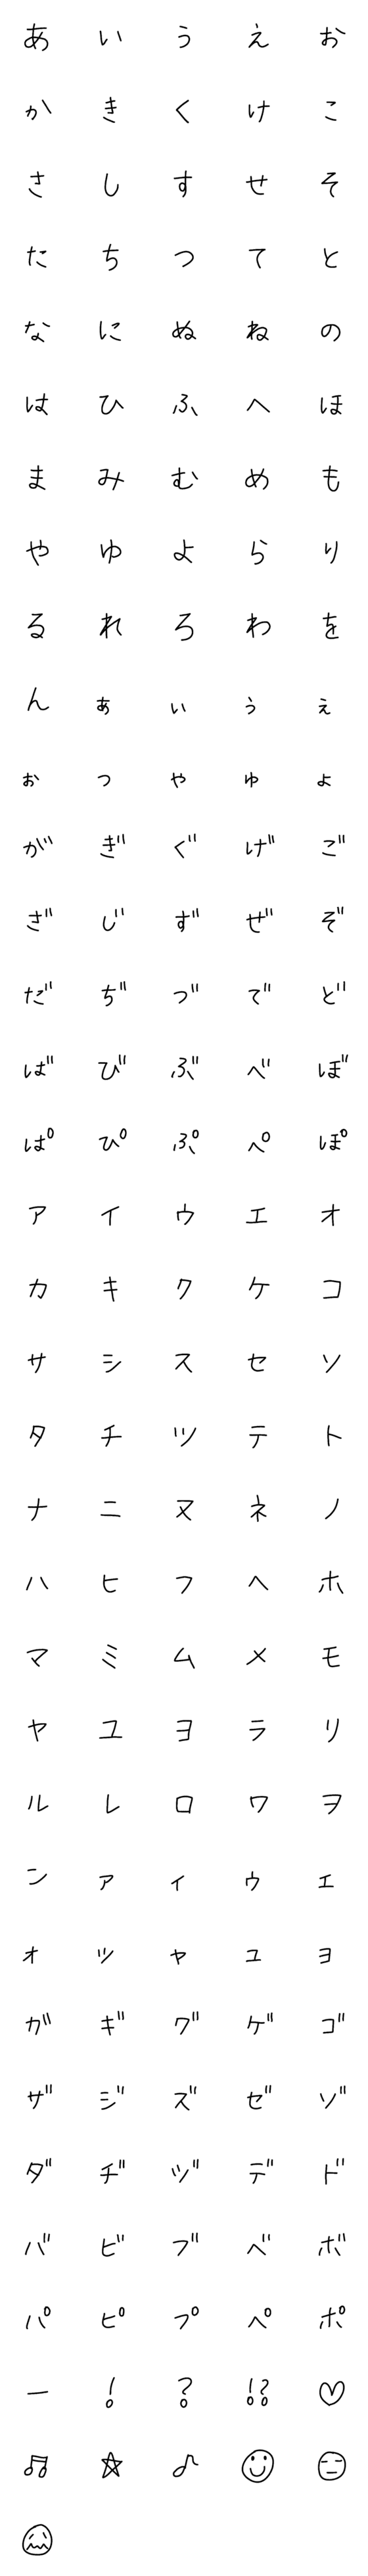 [LINE絵文字]シンプル 文字 絵文字の画像一覧